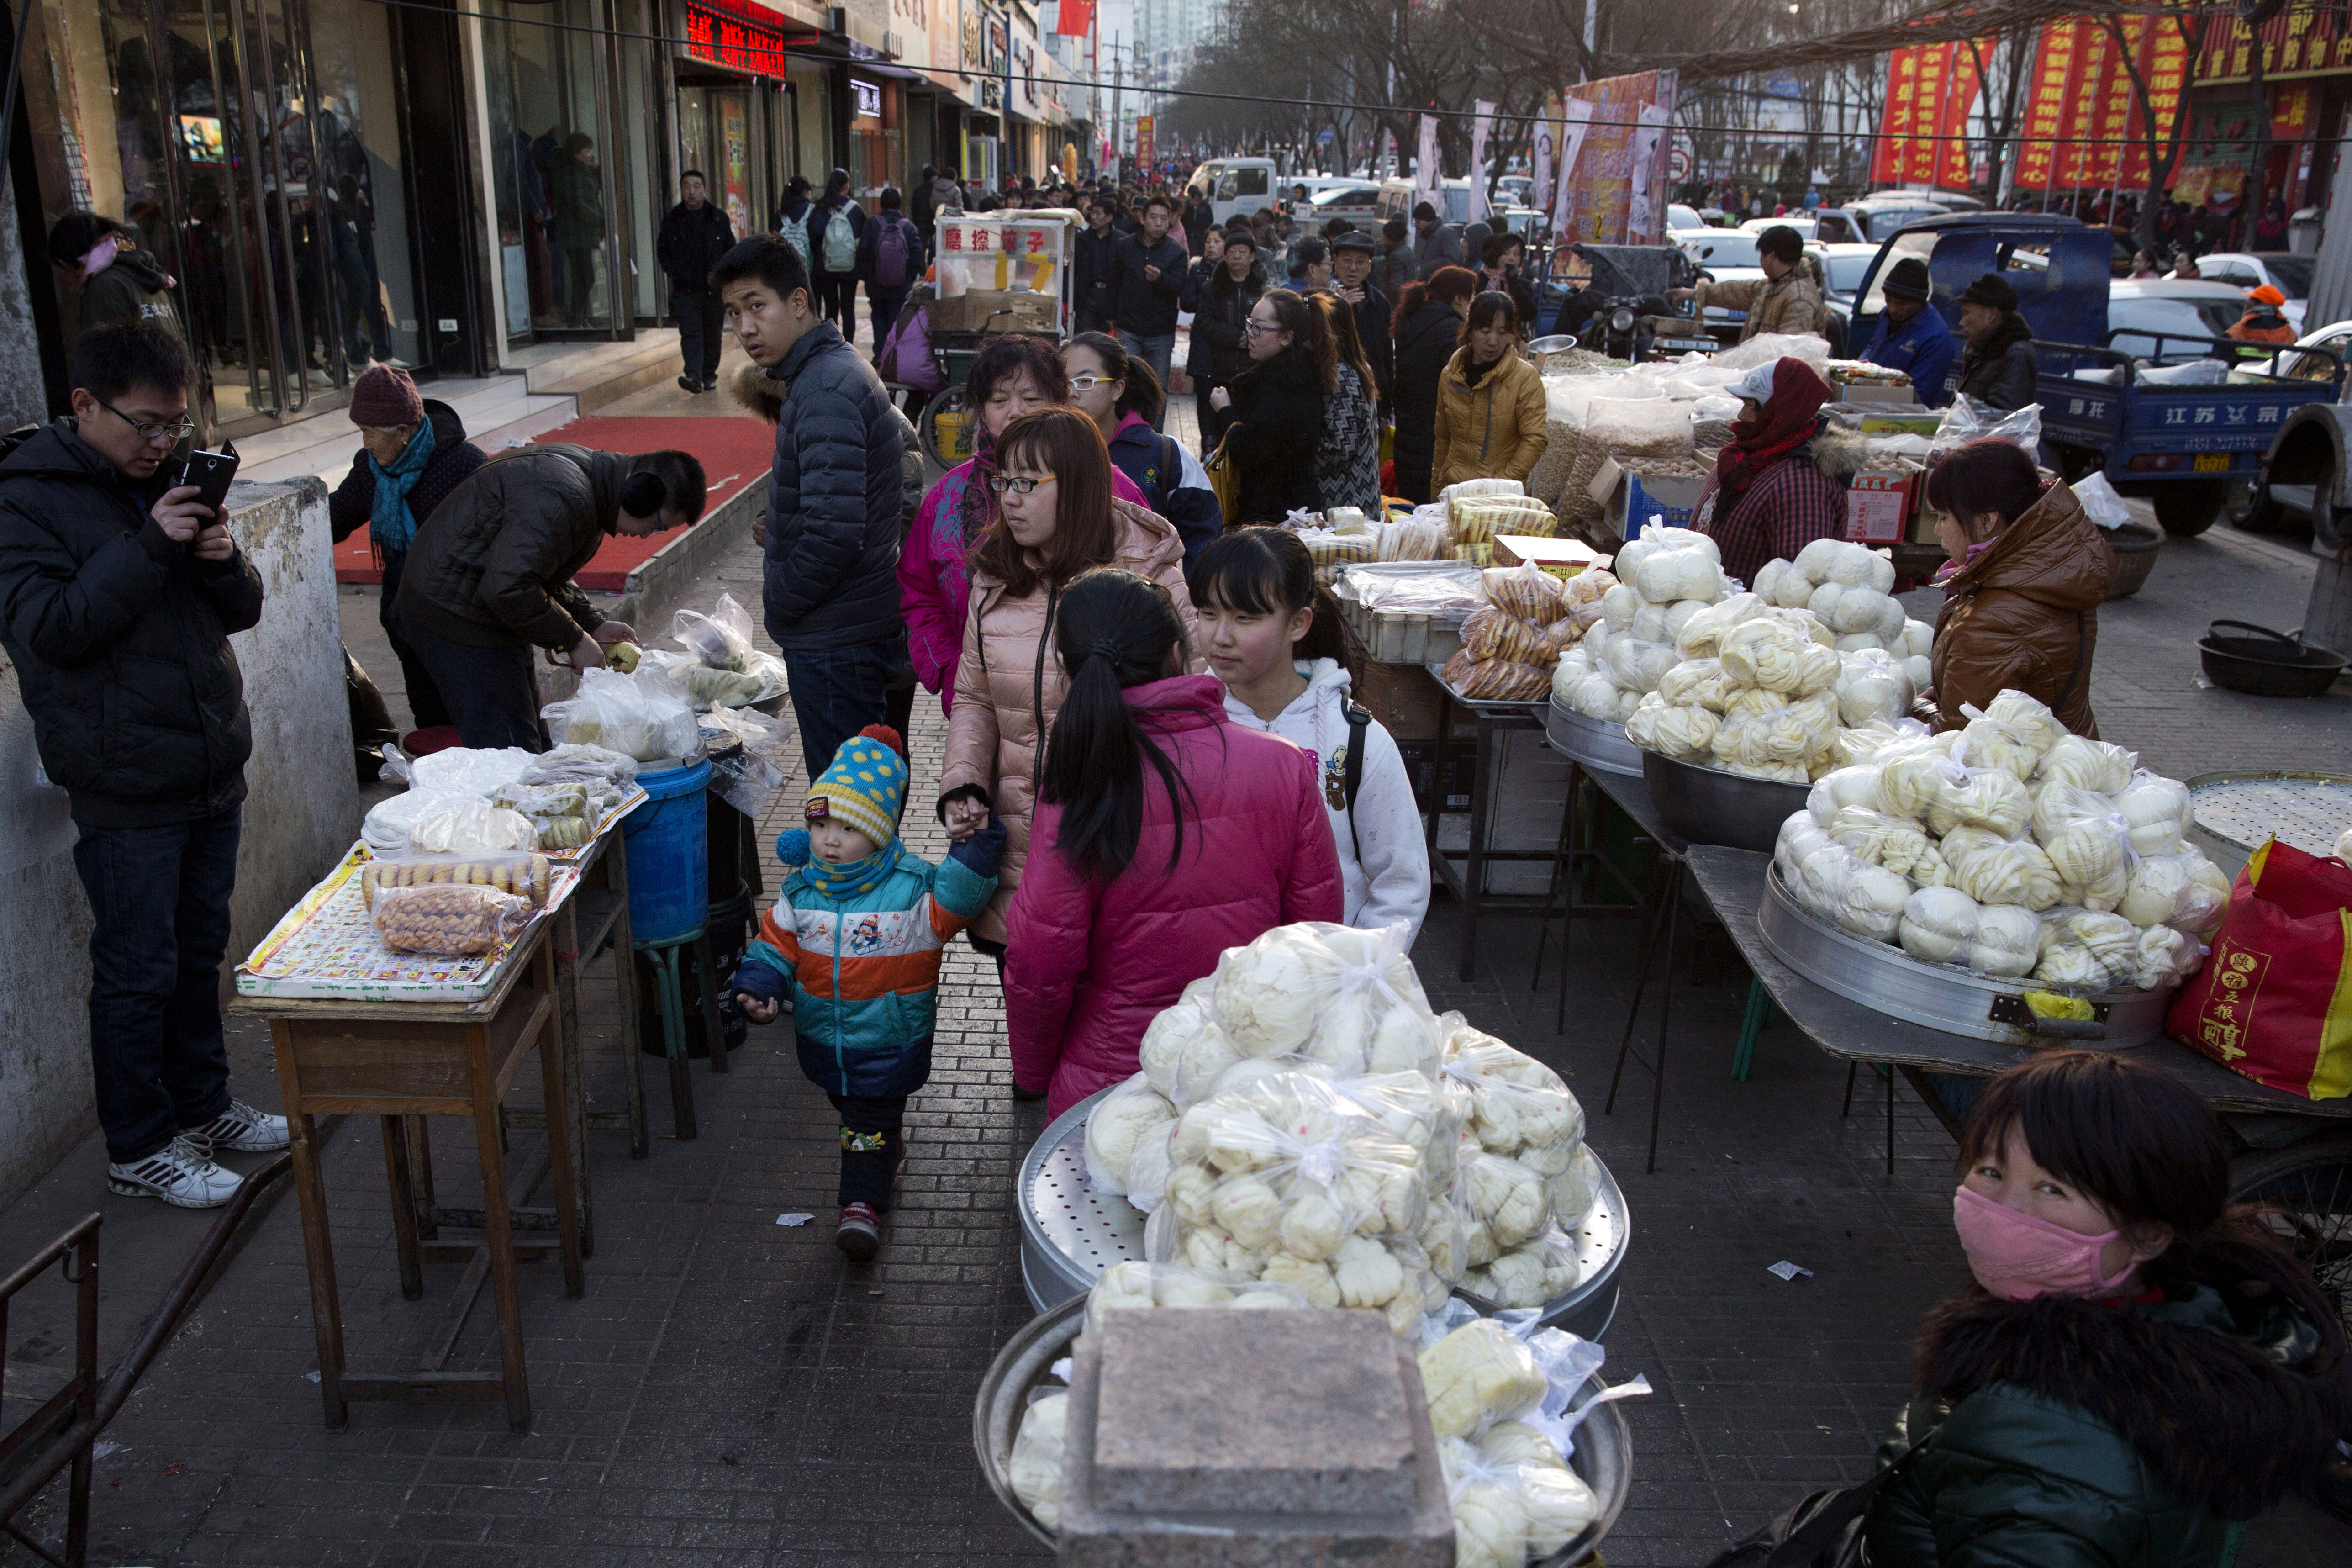 A market in China's Shanxi province as a survey showed an overall slowdown in the country's economy in the first quarter of 2015. Photo: AP